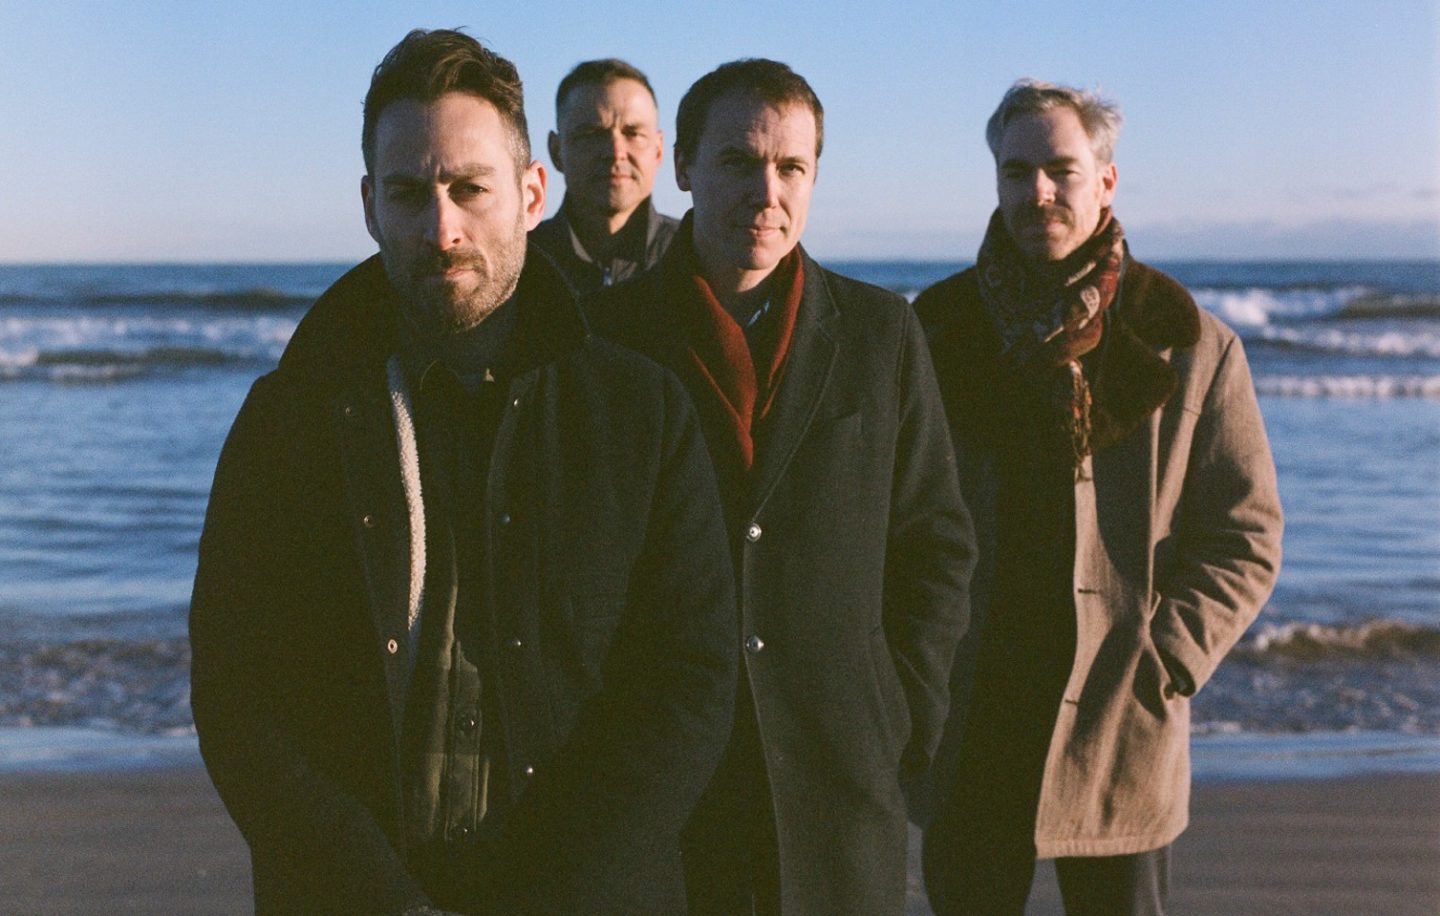 Introducing American Football And Their Sub-Genre To A New Generation